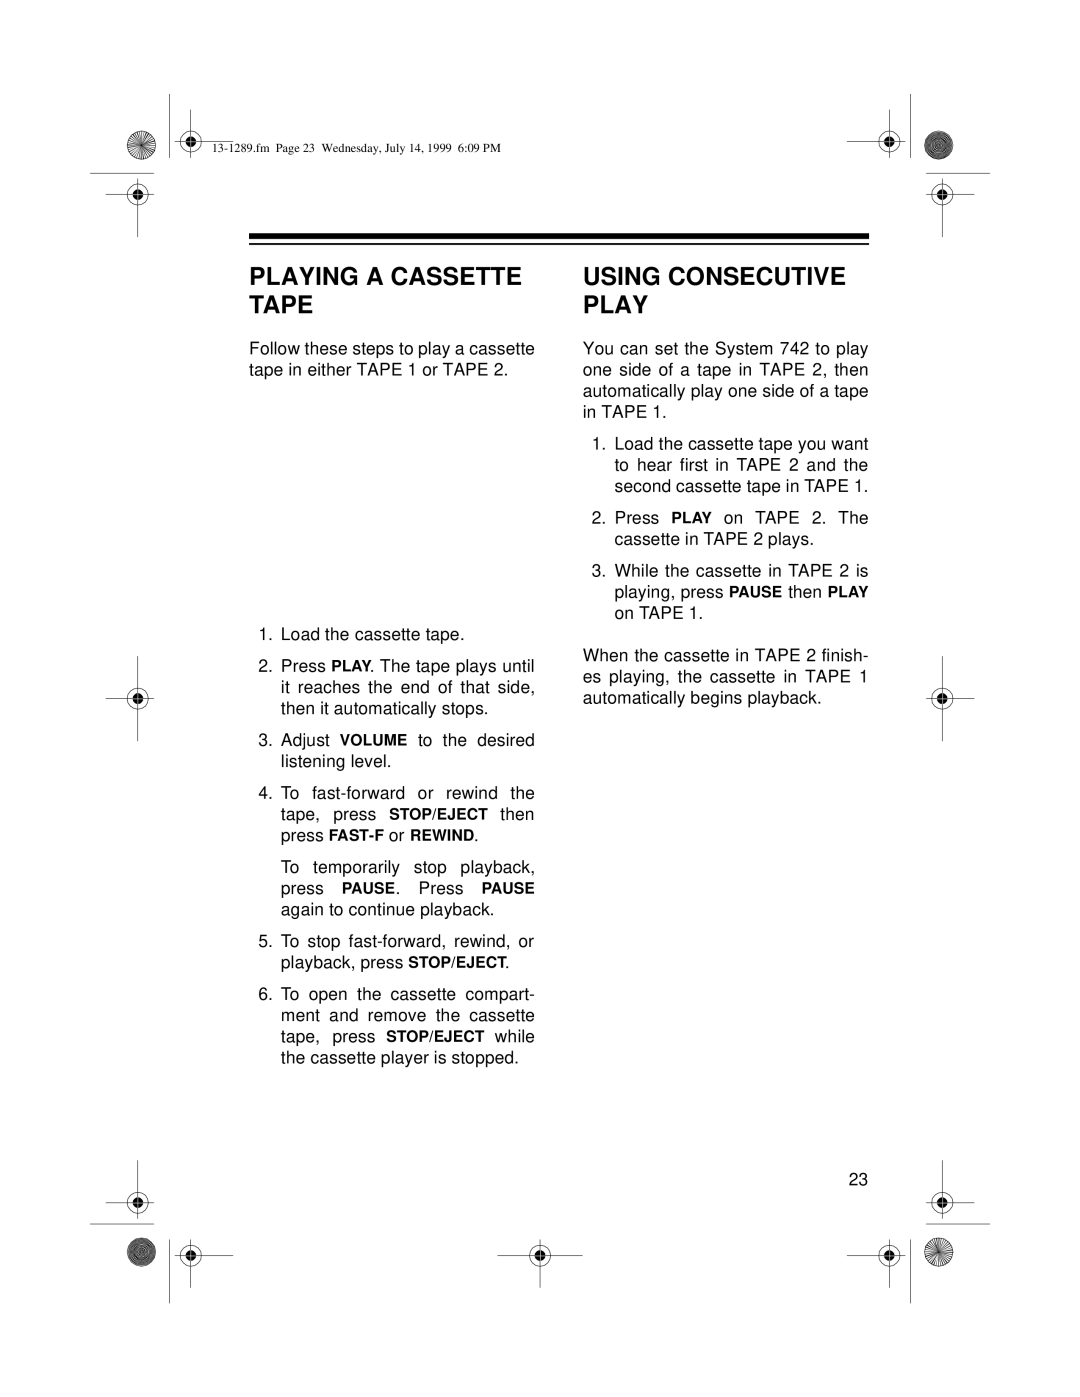 Optimus 742 owner manual Playing A Cassette Tape, Using Consecutive Play 